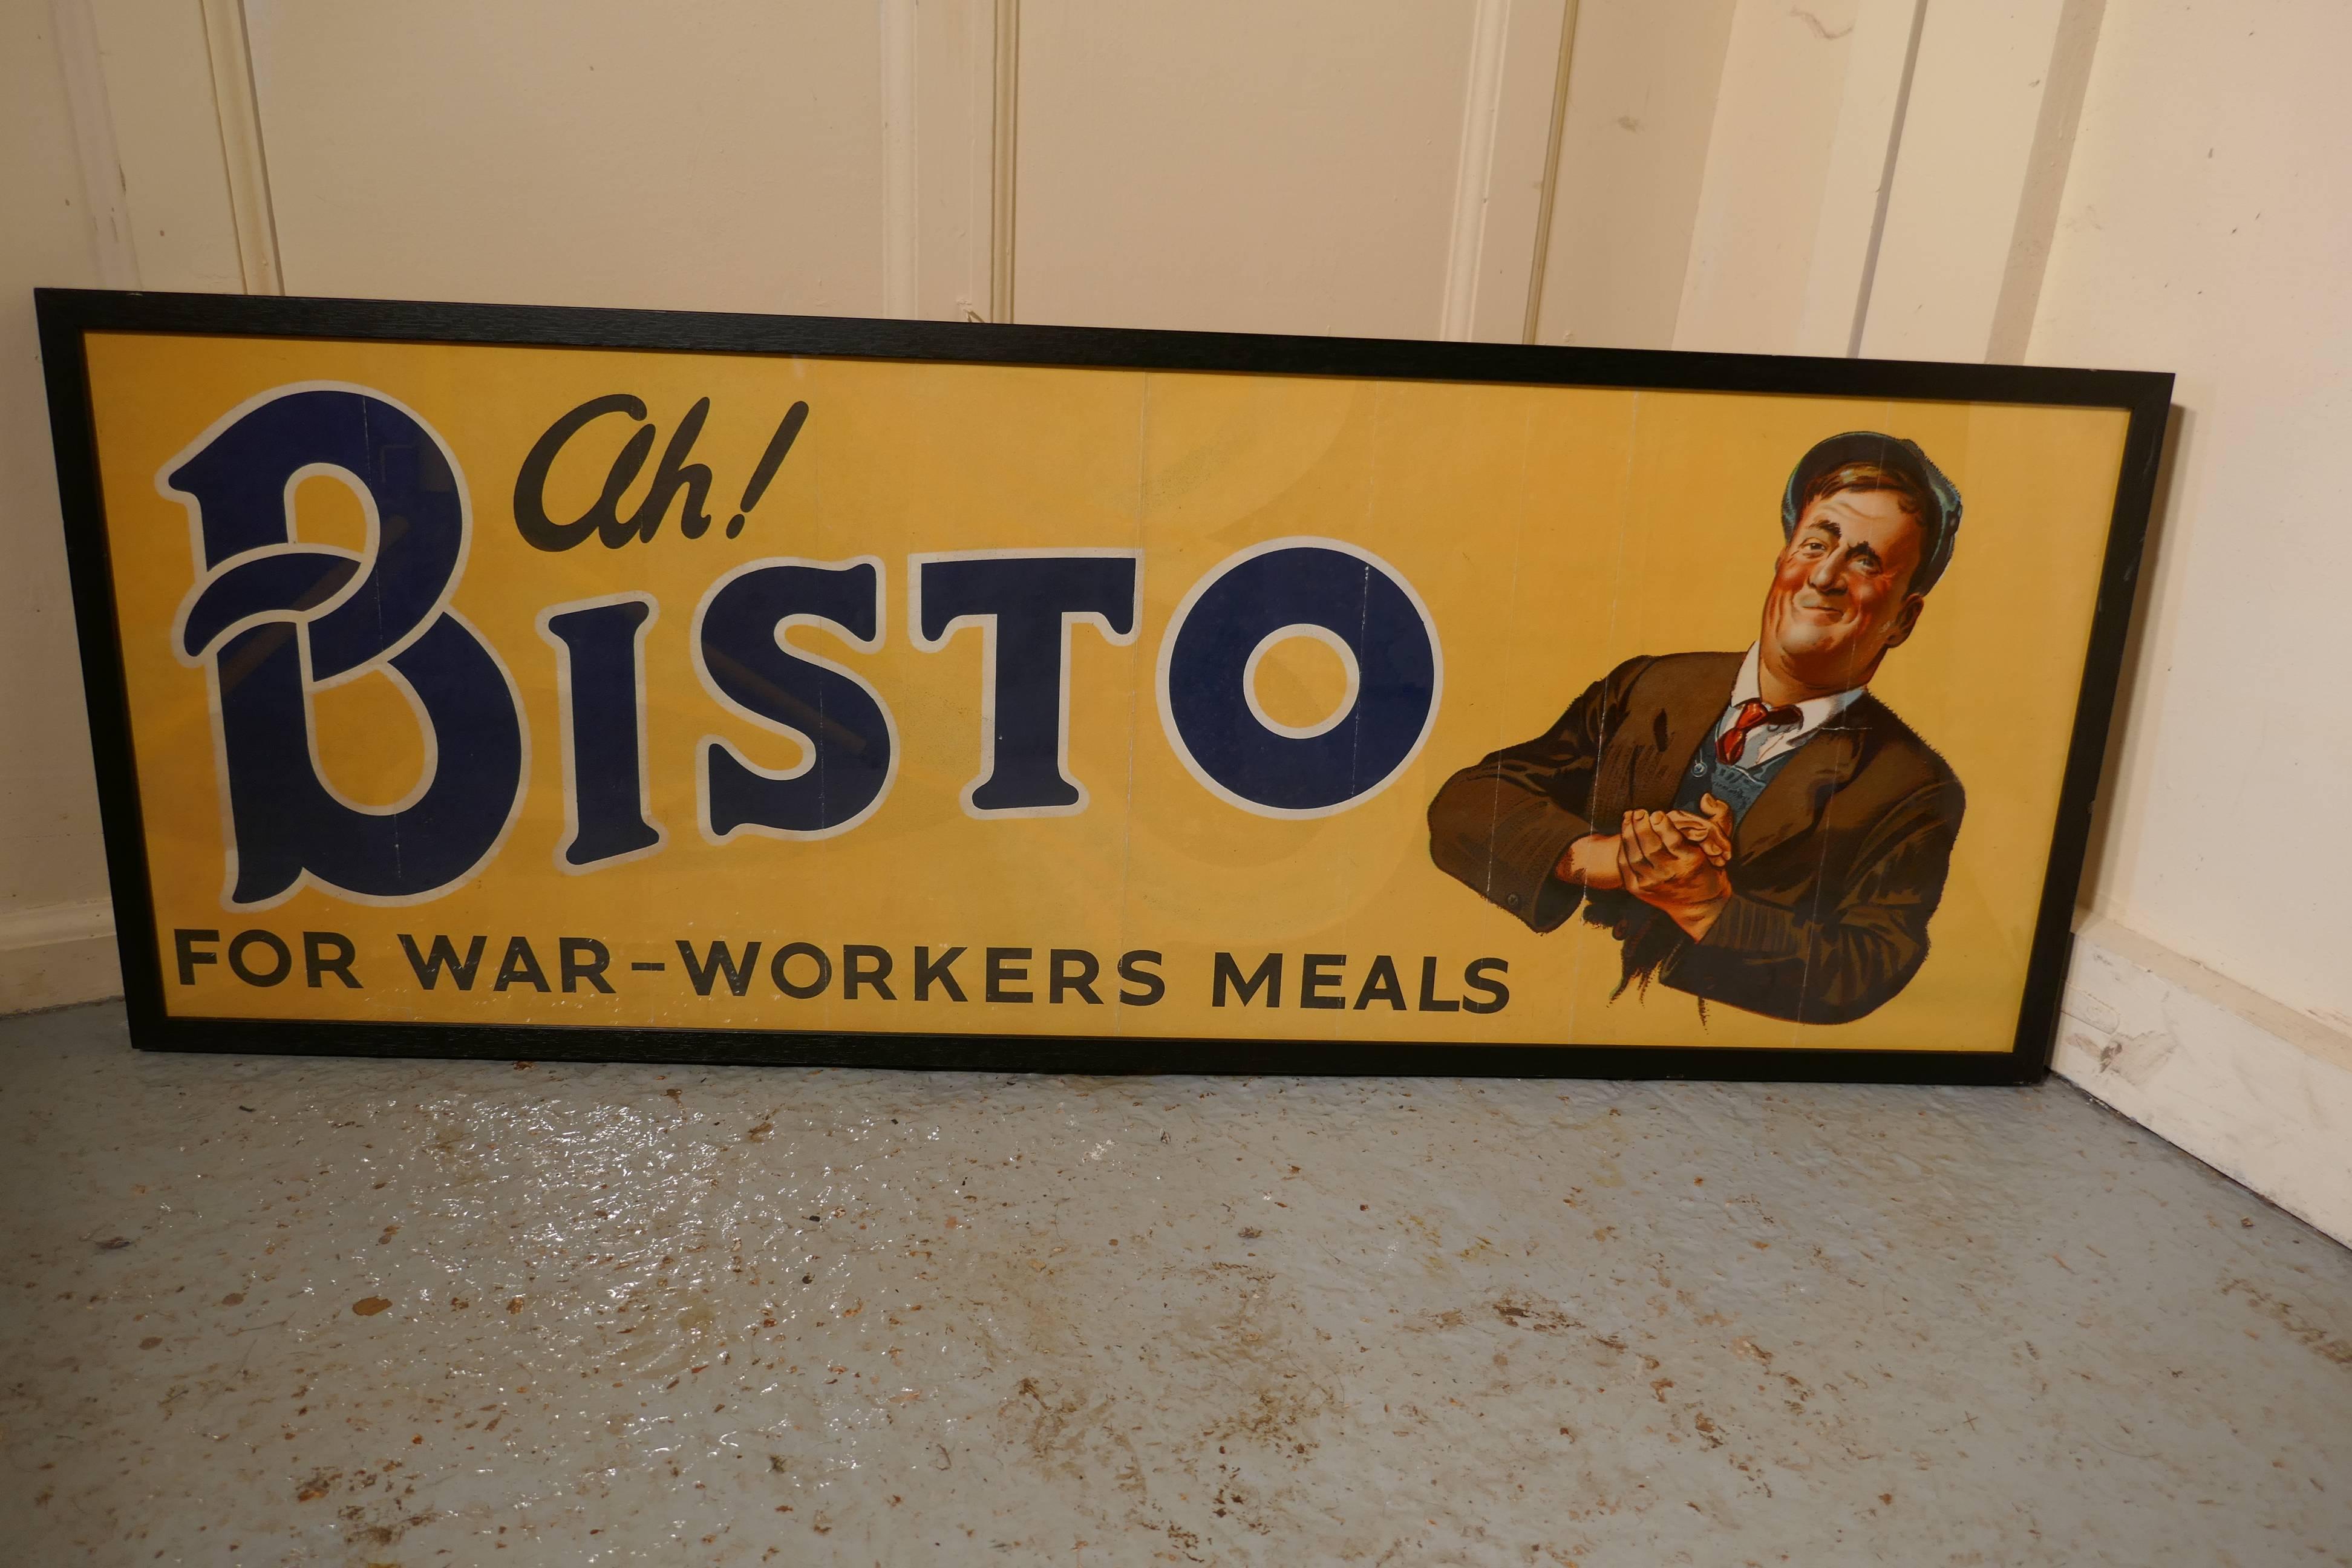 20th Century Framed Bisto Advertising Sign, Ah Bisto for War-Workers Meals Advertising Sign